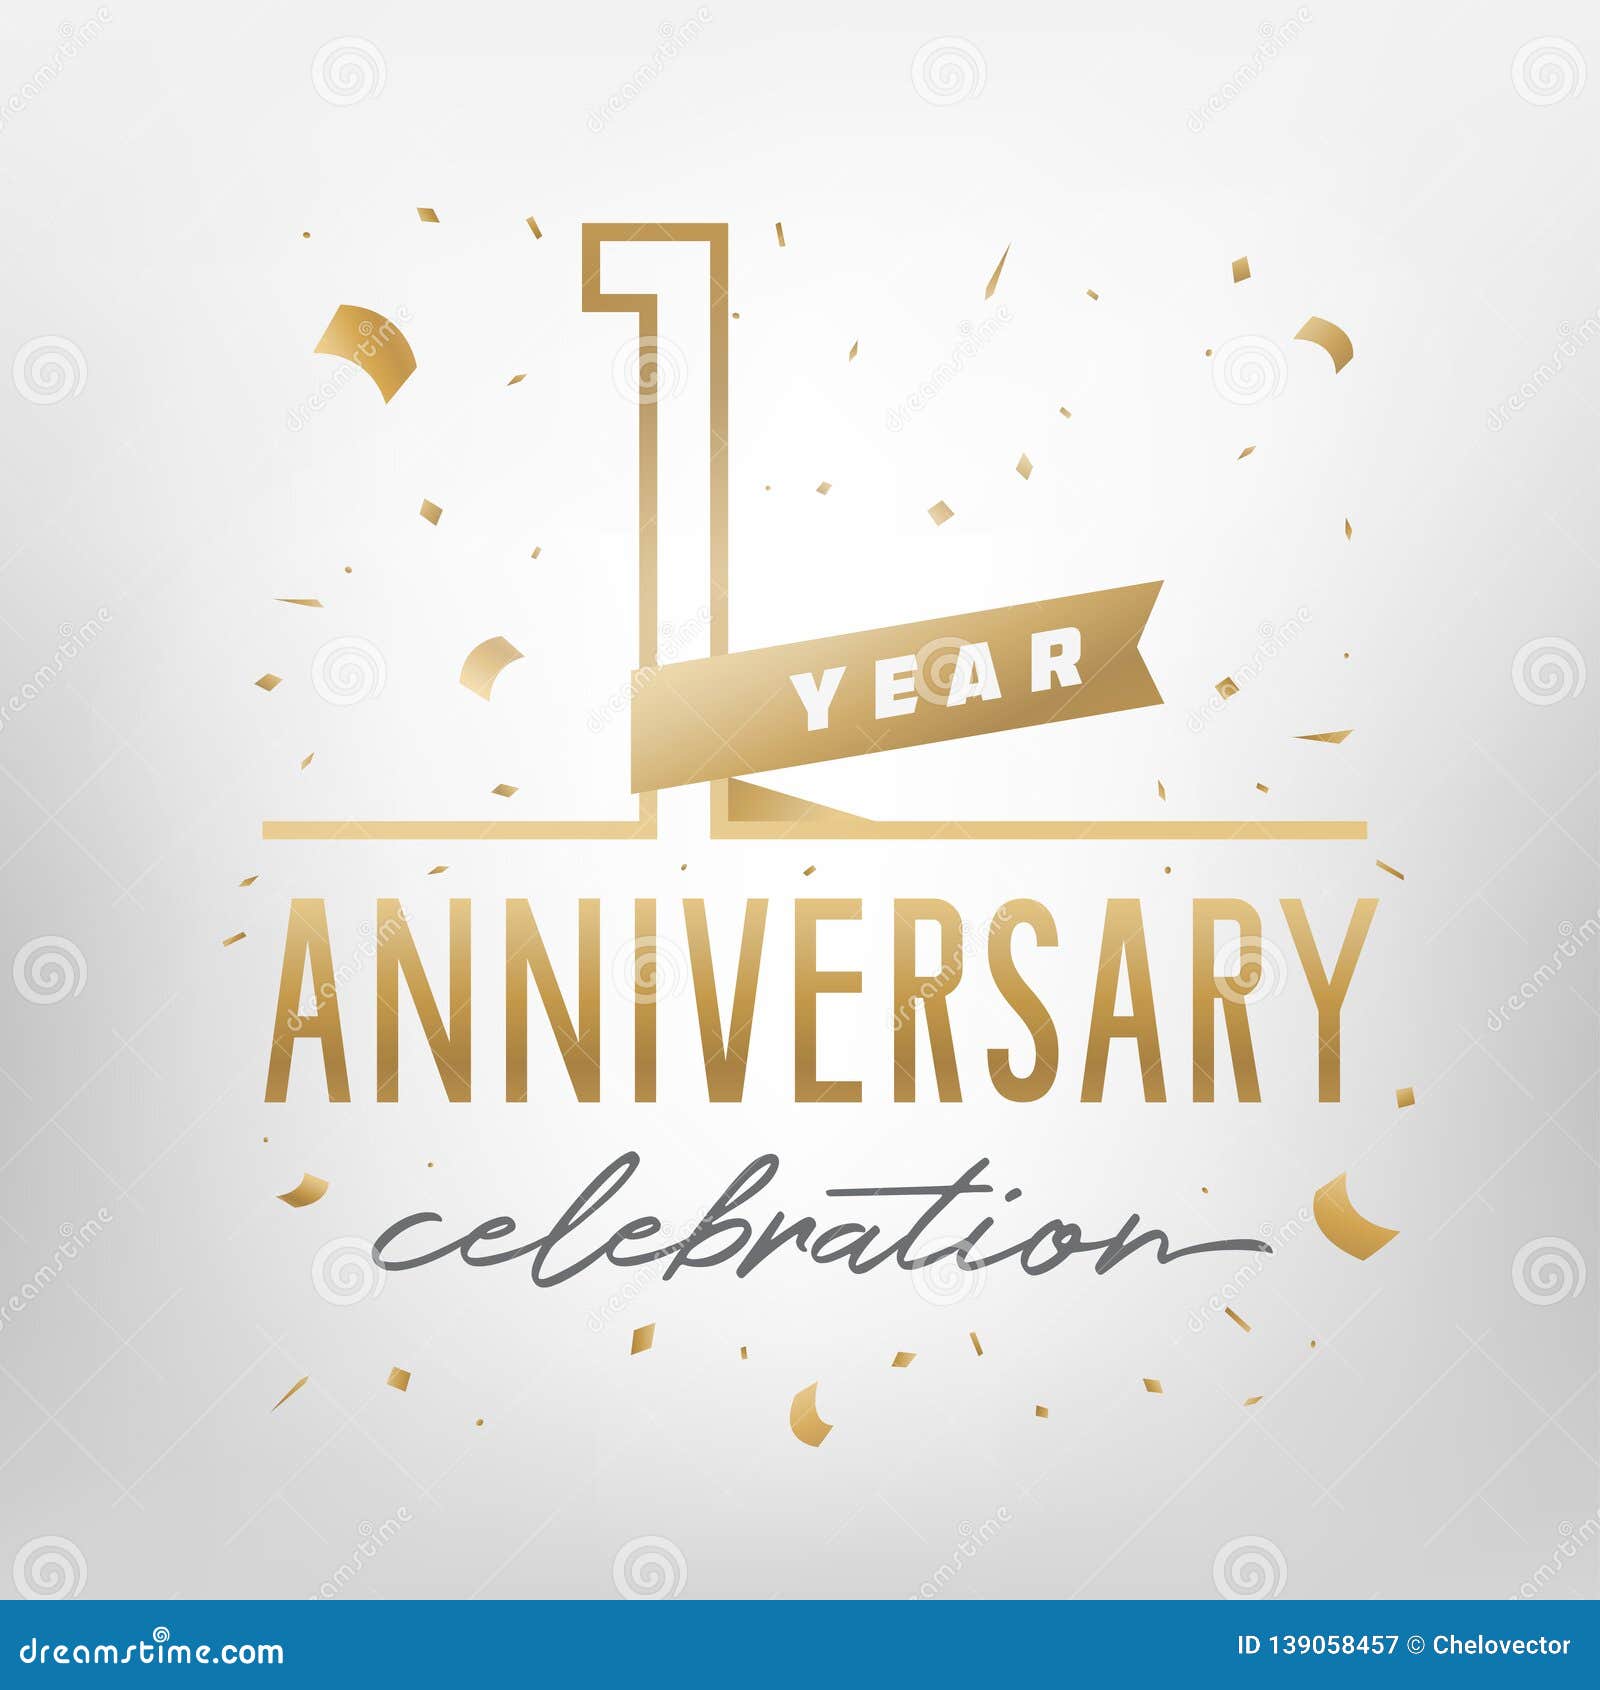 First Anniversary Celebration Golden Template. Vector Illustration Within Anniversary Certificate Template Free